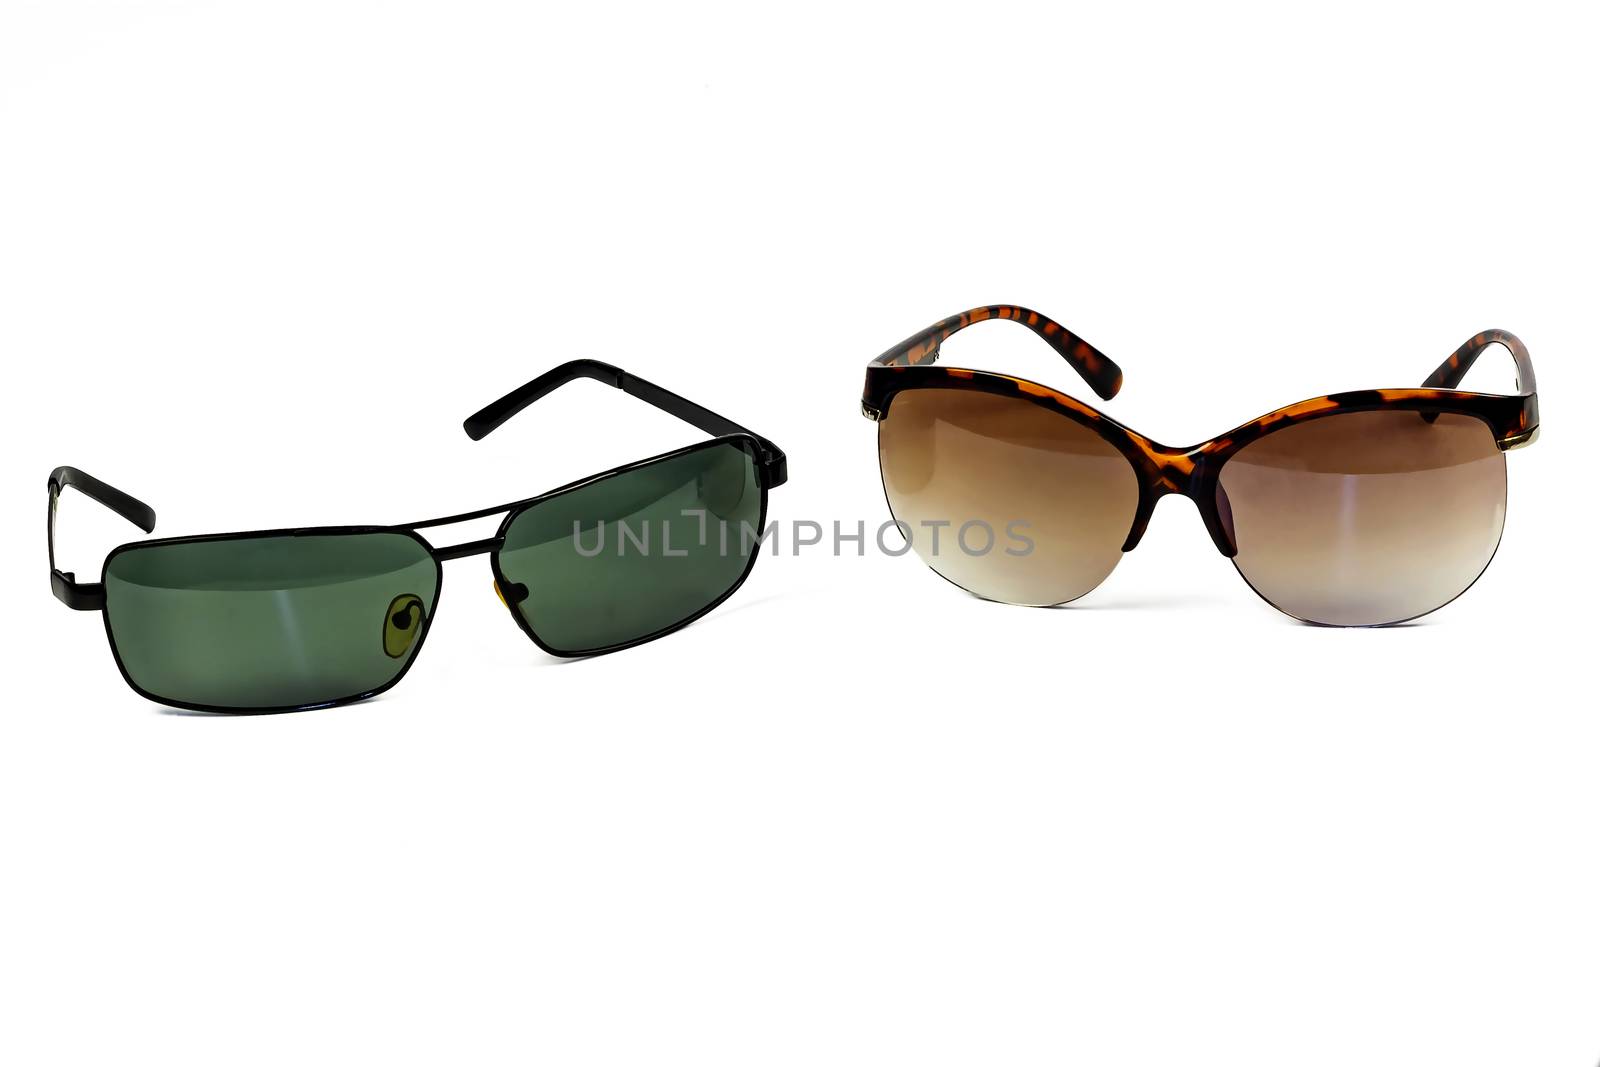 Male and female glasses from the sun on a light background